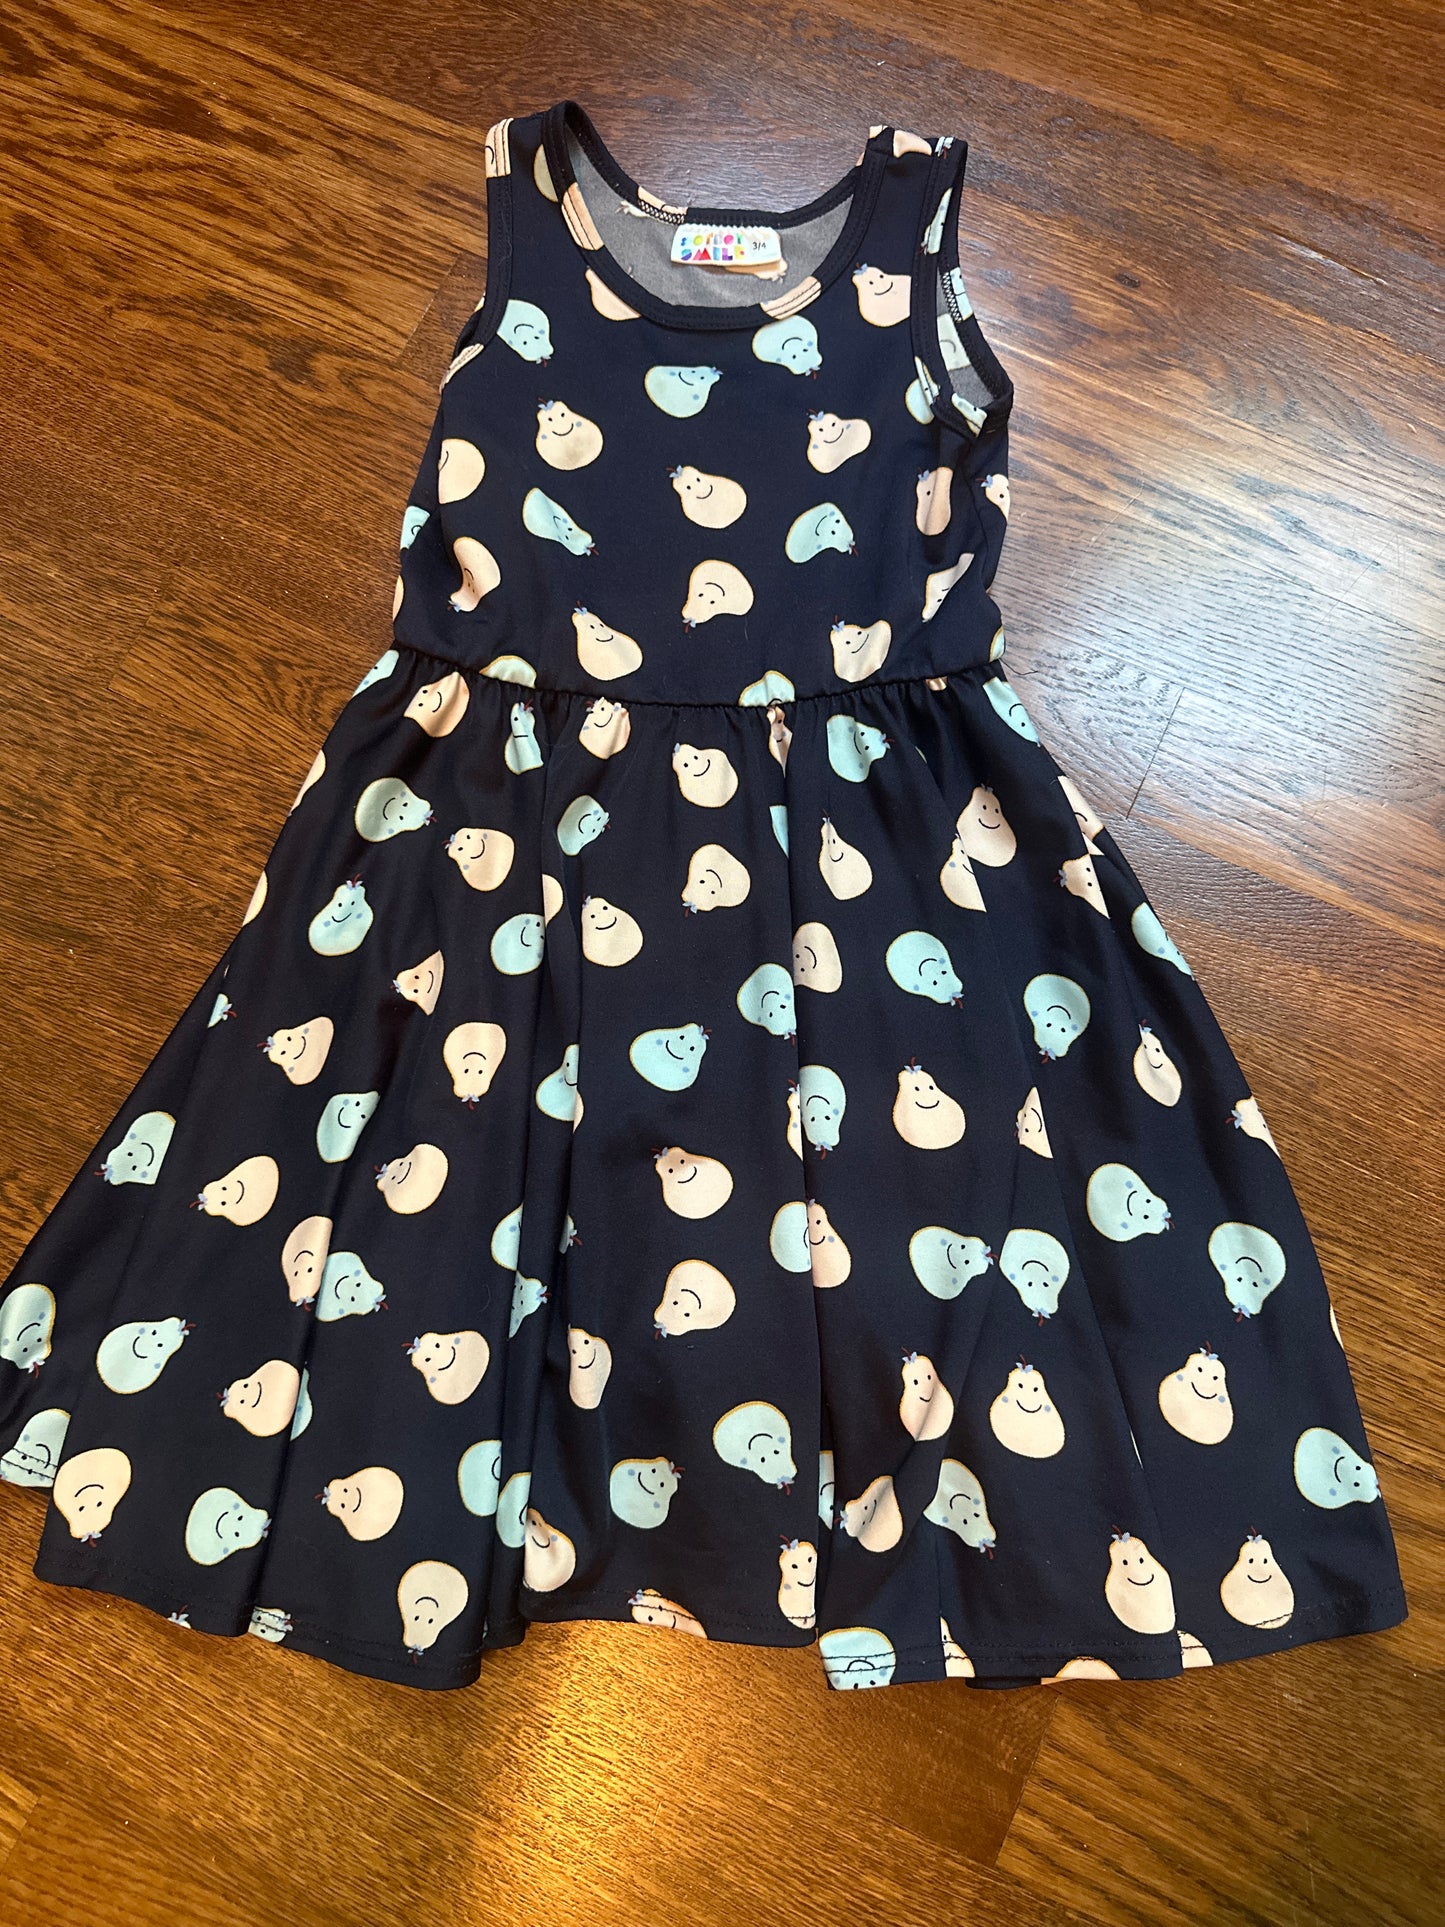 Girls 3/4 Dot Dot Smile navy with pears twirl dress